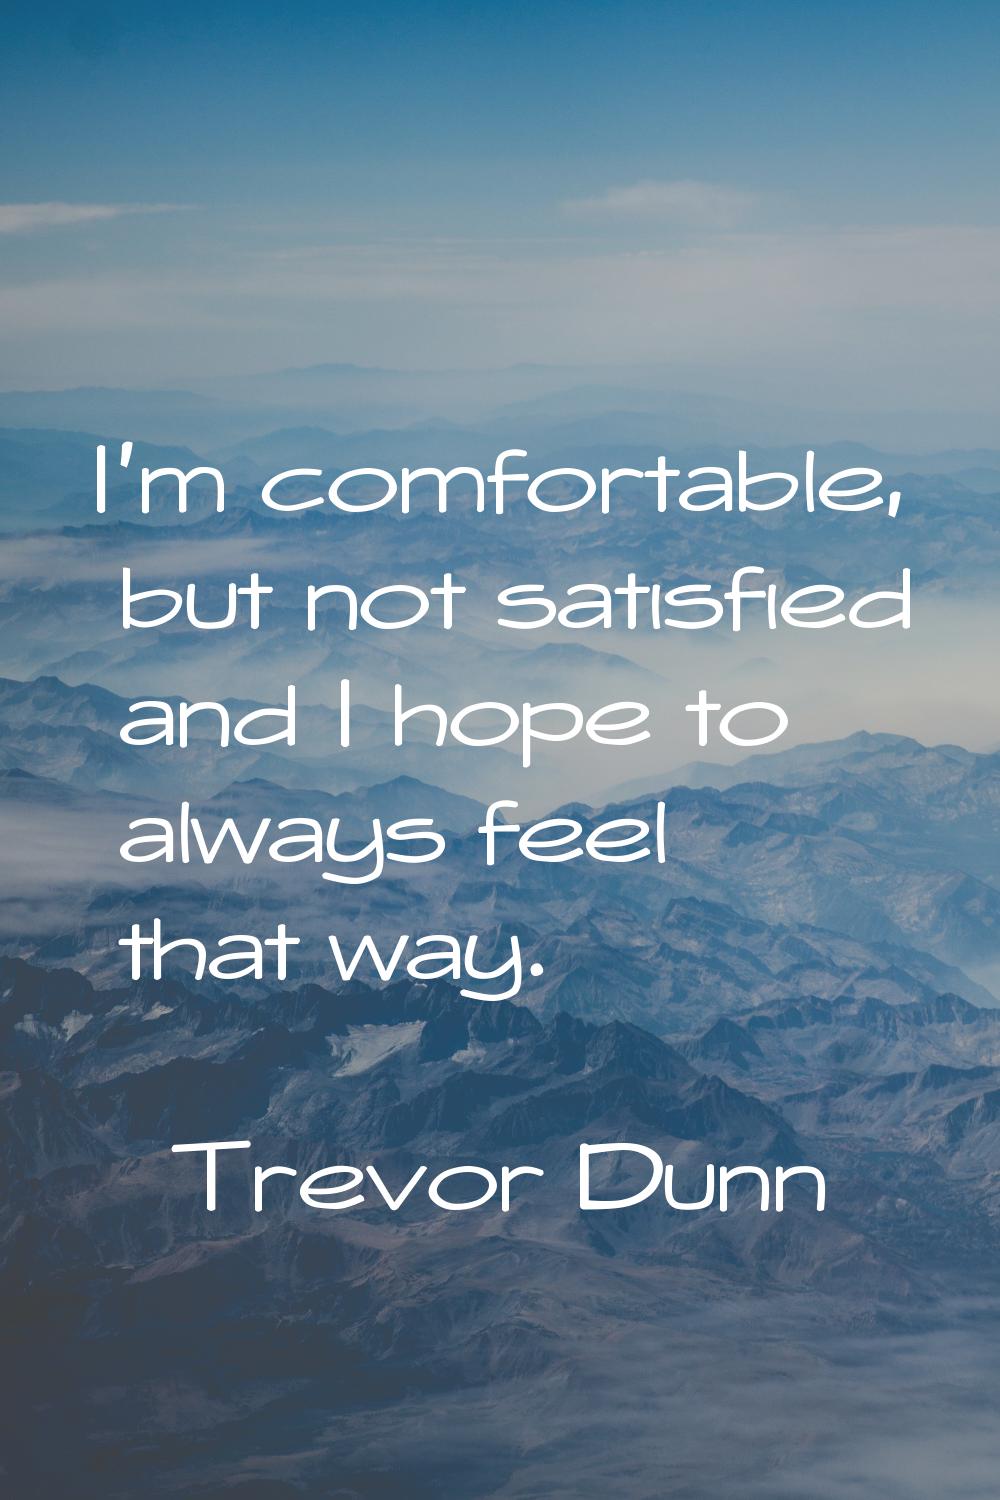 I'm comfortable, but not satisfied and I hope to always feel that way.